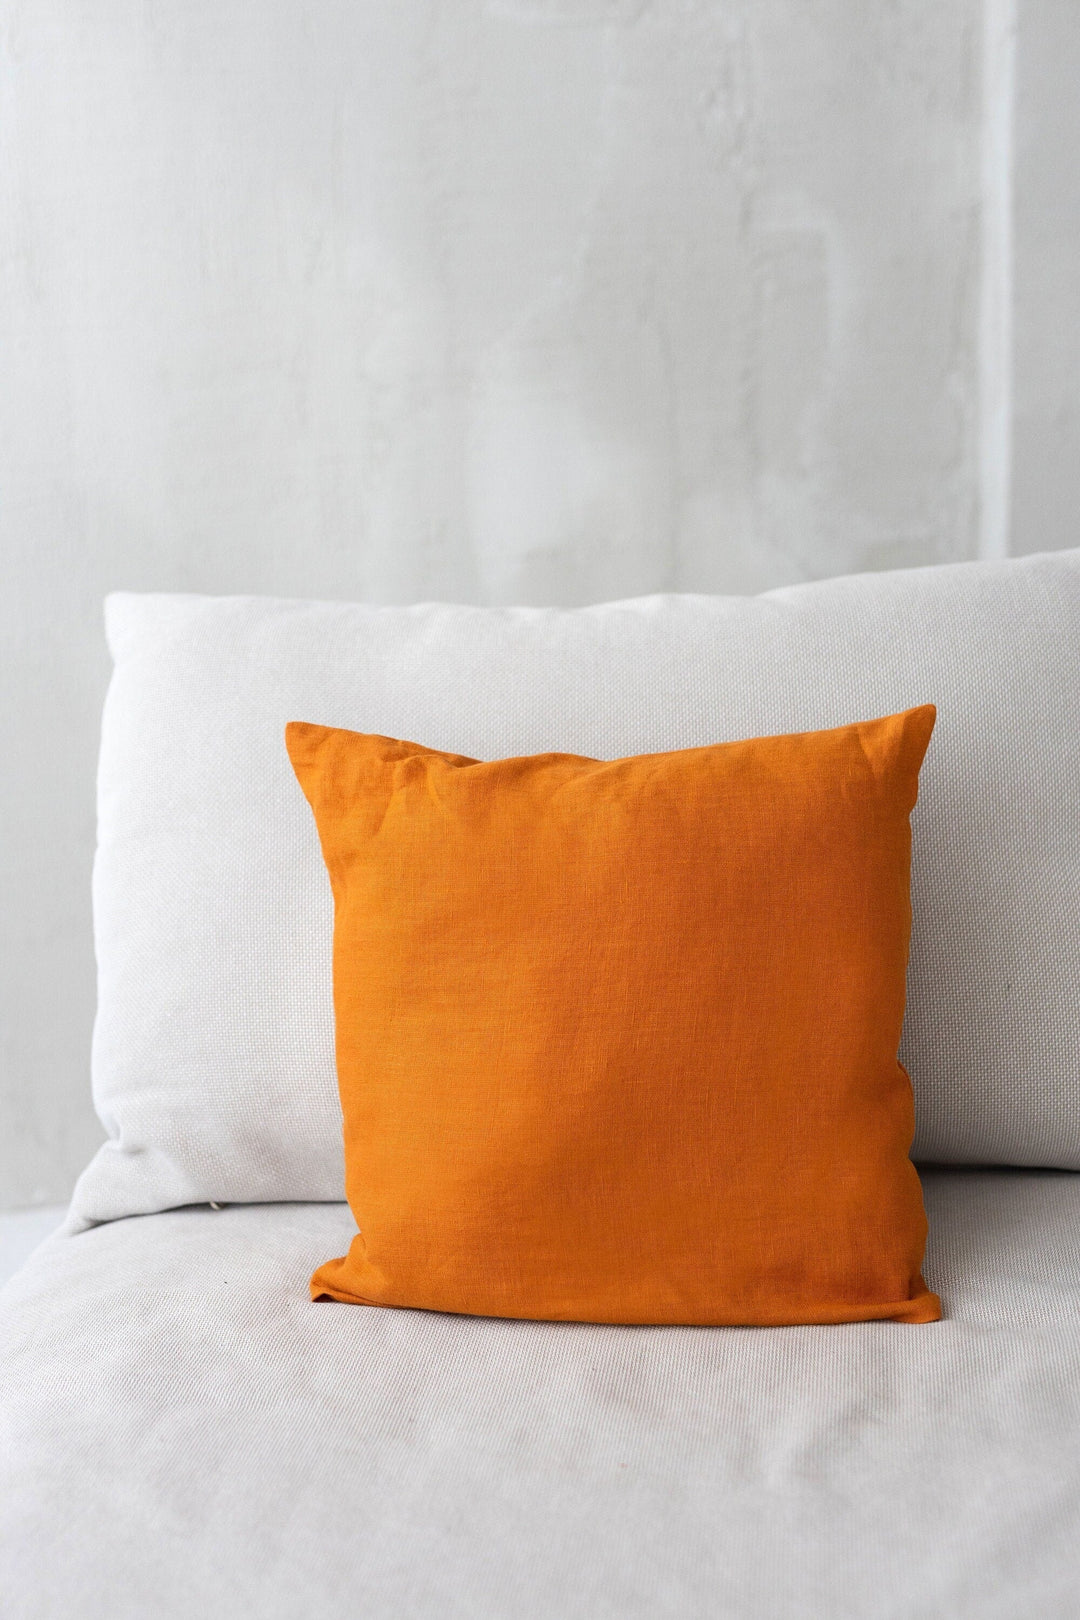 Deco Pillow Cover In Mustard Color - Daily Linen